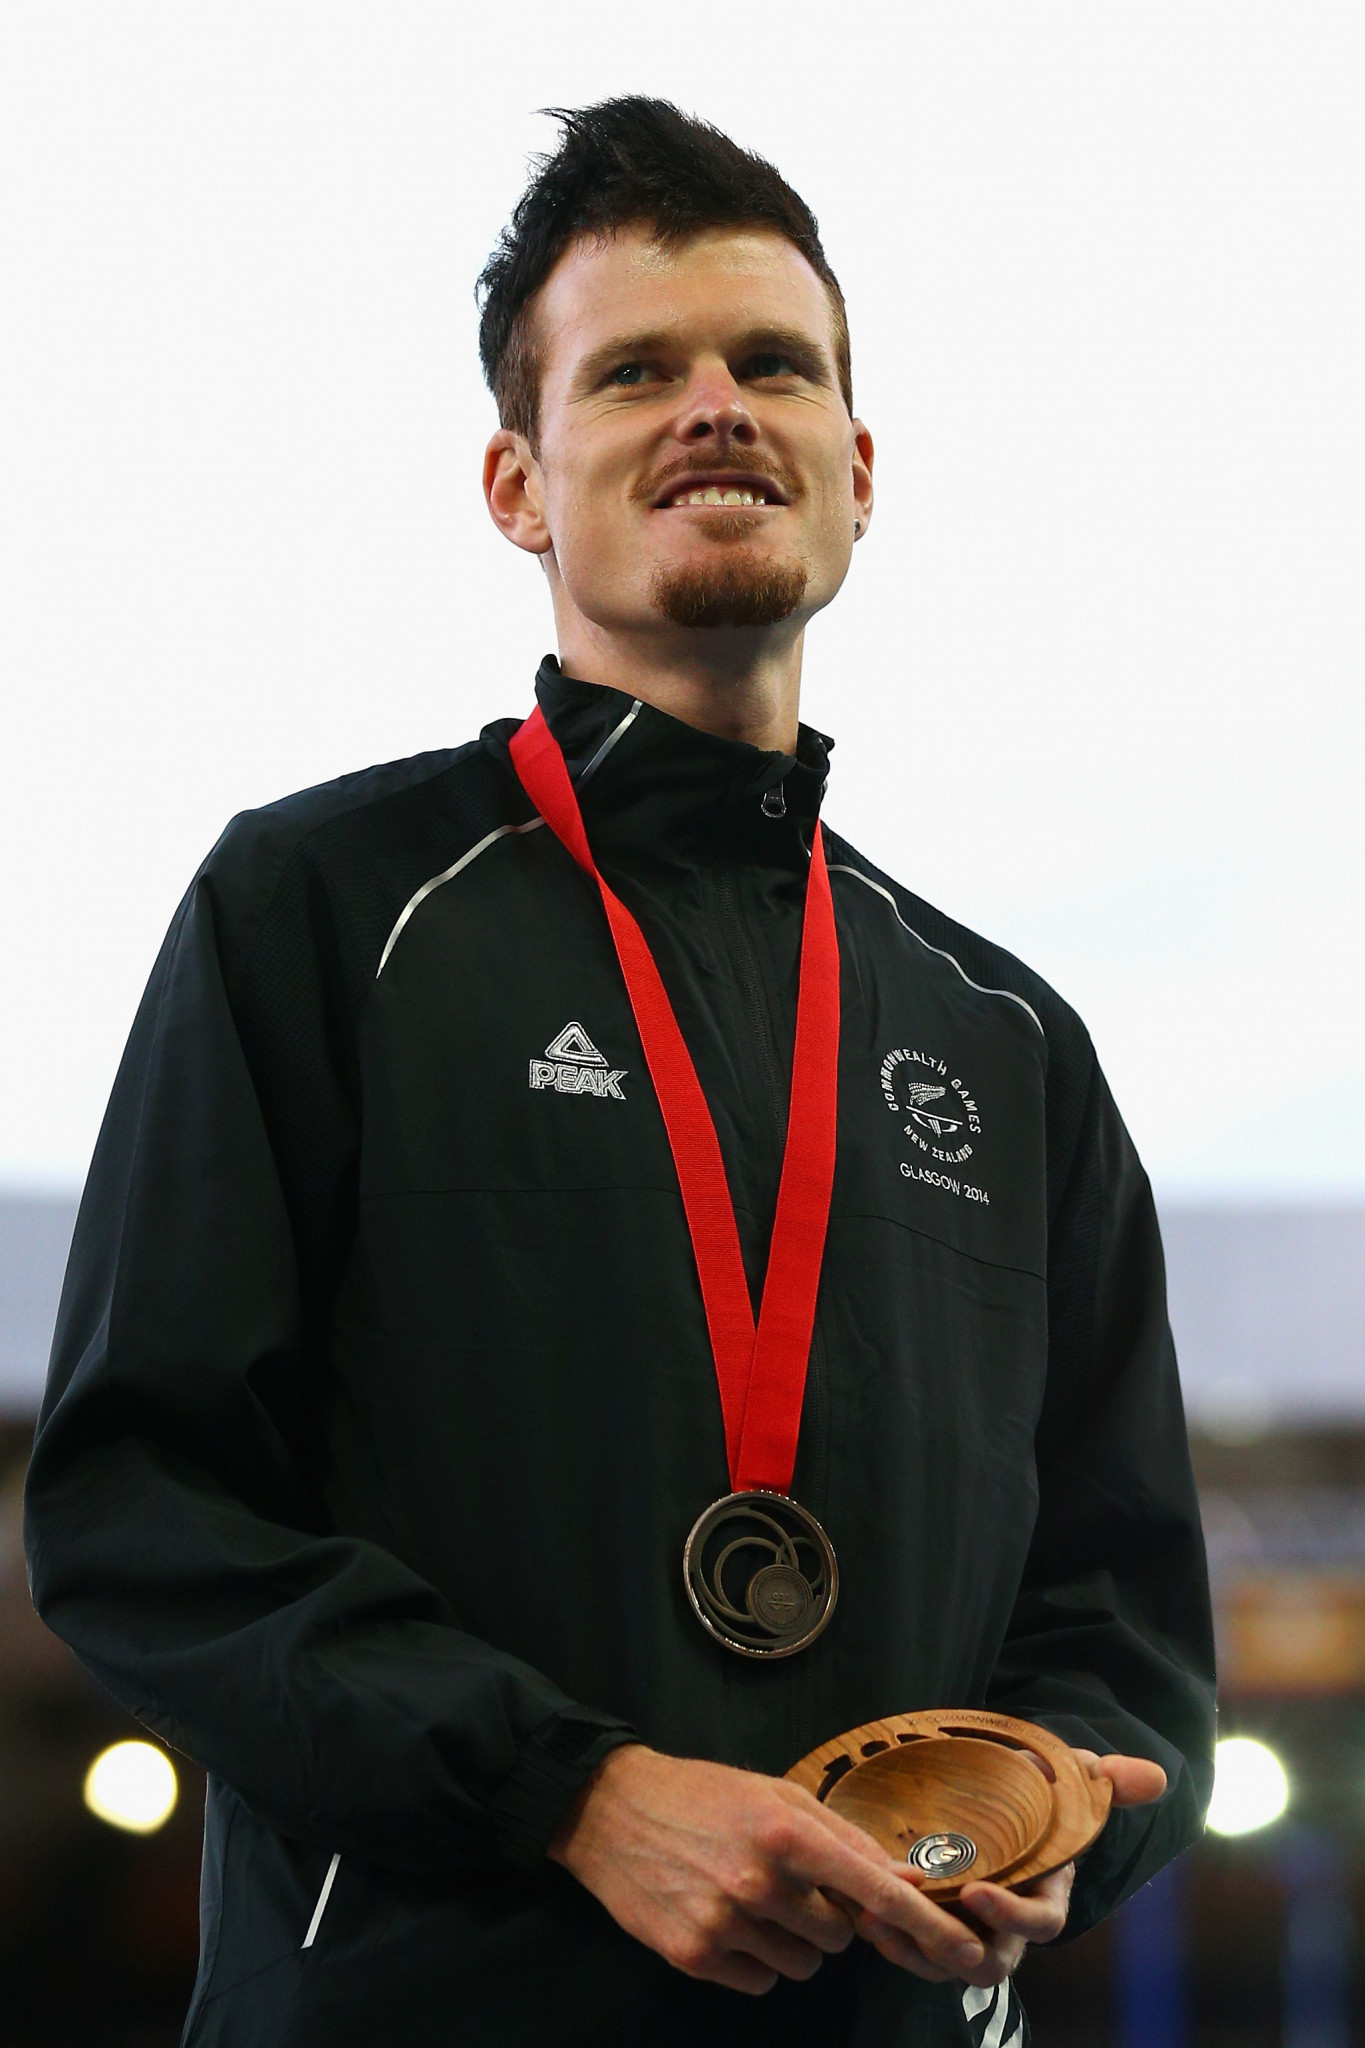 Zane Robertson won the Commonwealth Games bronze medal in the 5,000m at Glasgow 2014 ©Getty Images